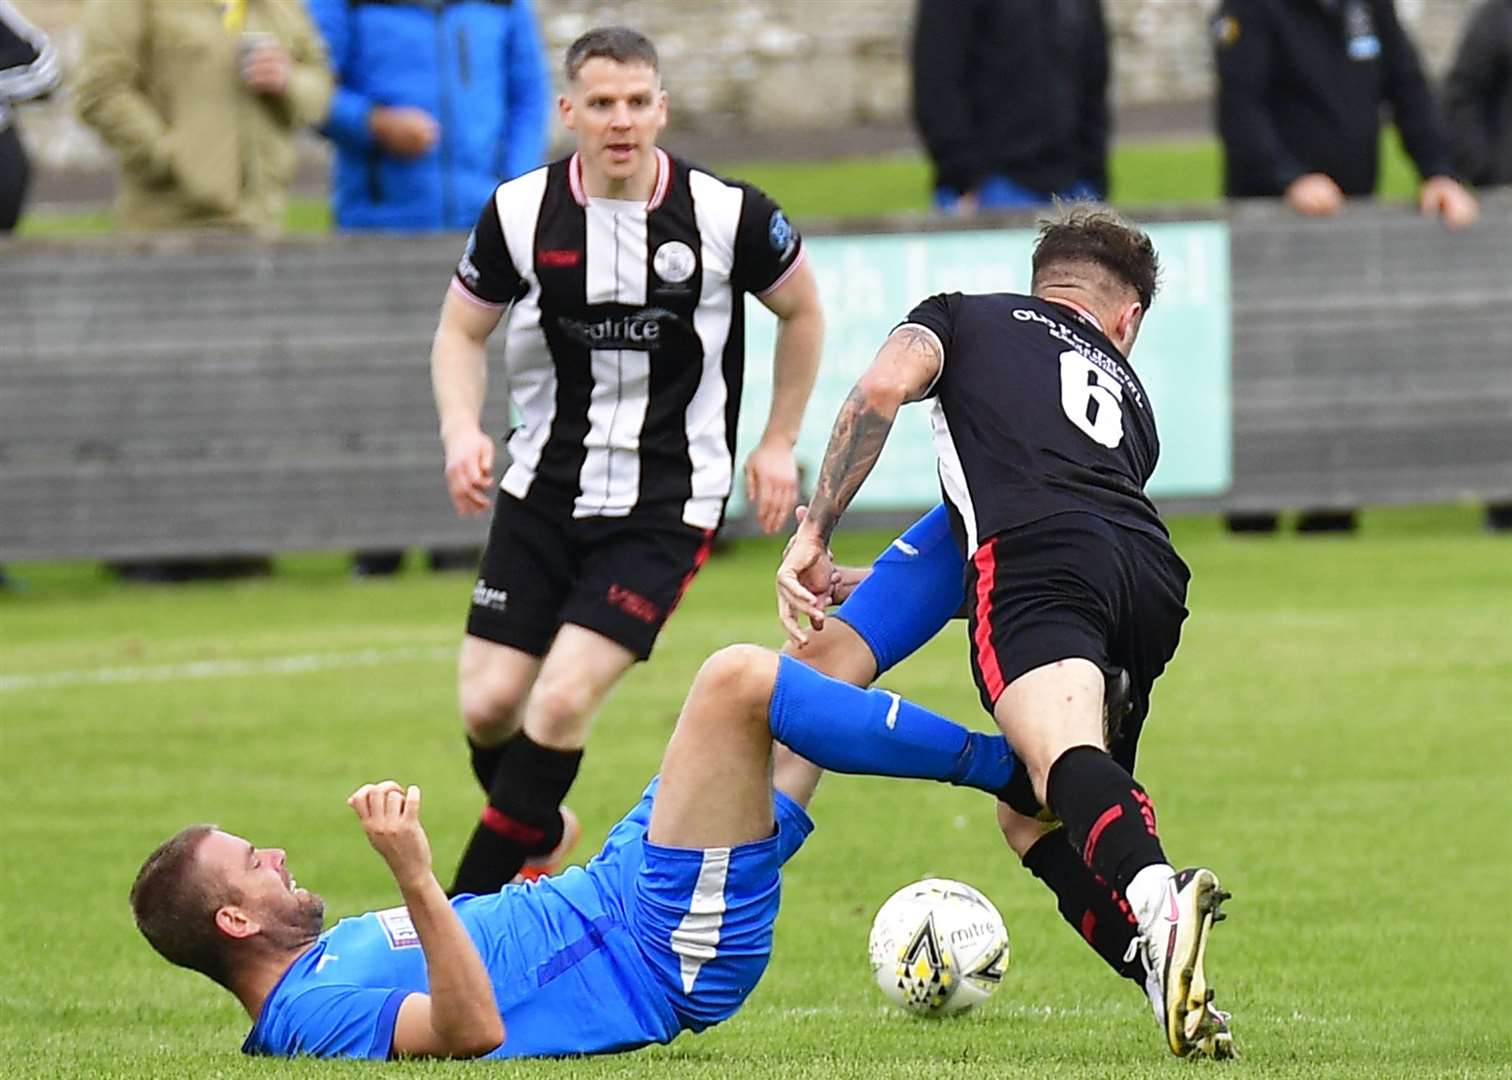 Bo'ness United's Stuart Hunter has both feet up as he fouls Wick Academy's Jack Henry. Picture: Mel Roger